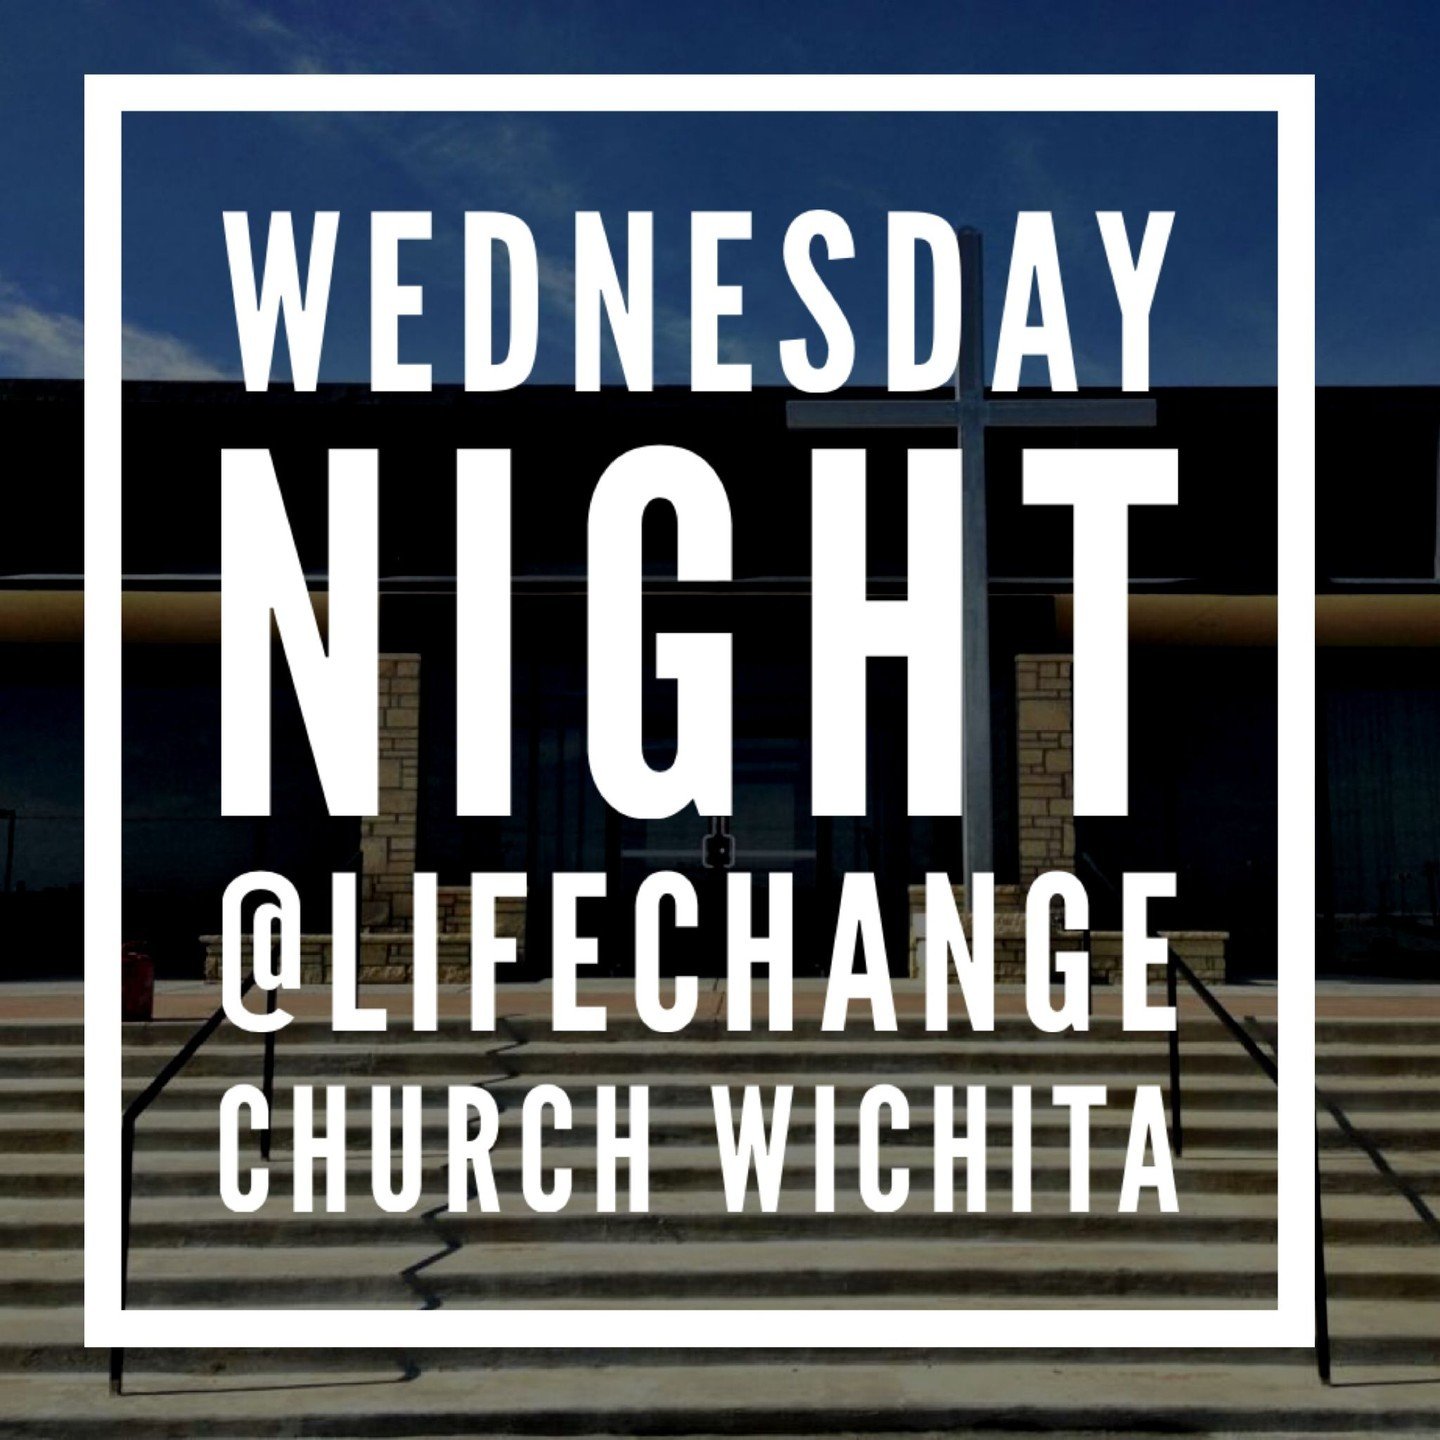 WEDNESDAY NIGHTS AT LIFECHANGE CHURCH 

6:00 PM 
IGNITE (Young Adults)
Praise Team Rehearsal
Adult Bible Studies
Student &amp; Kids Bible Study 
Grief Share

7:30 PM 
Band Practice

#lifechangechurchwichita